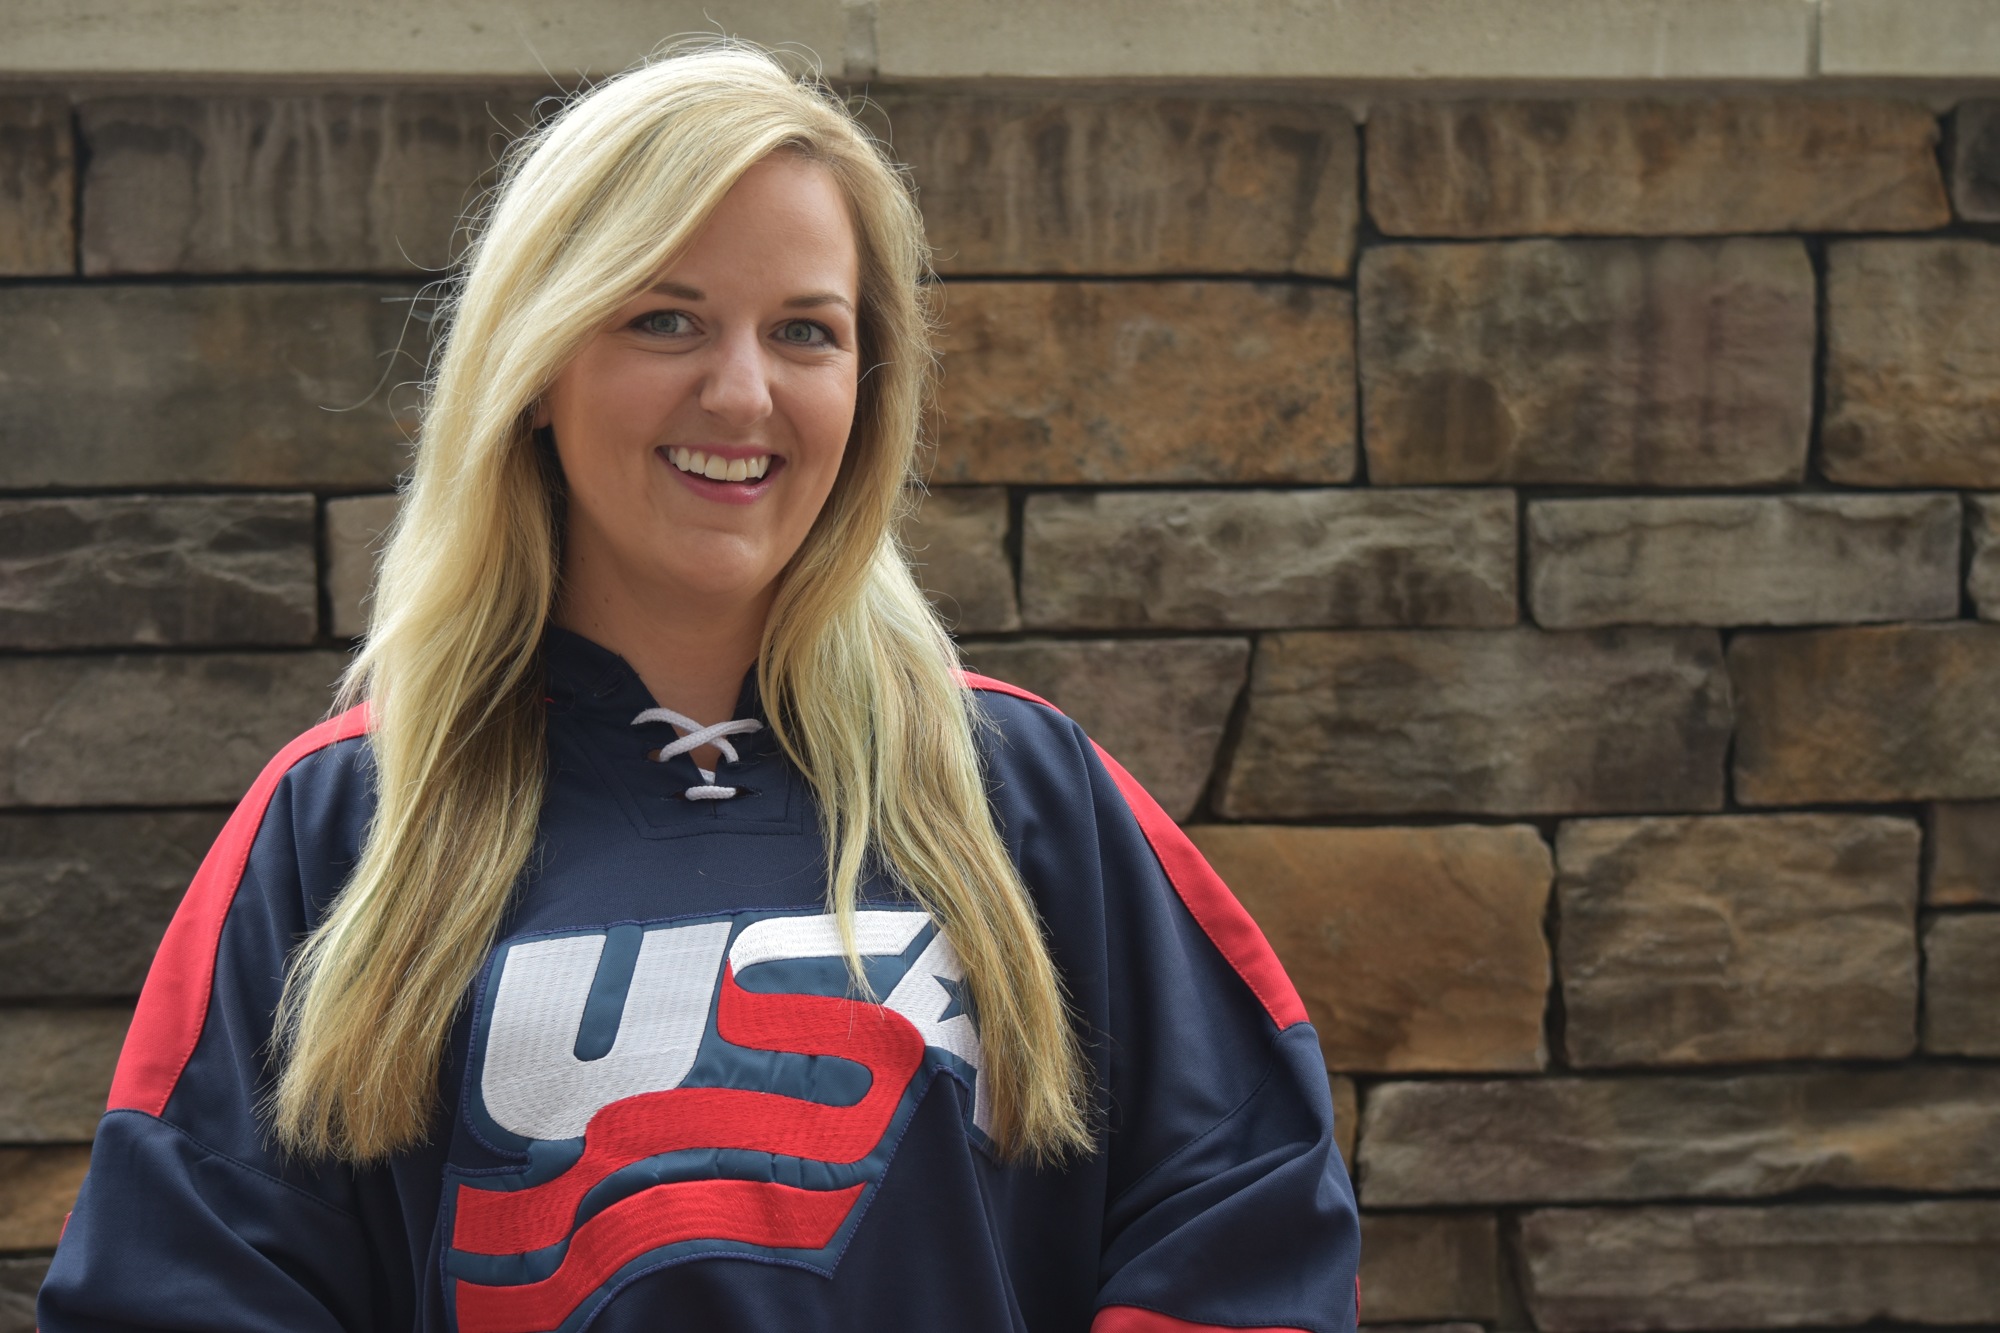 Lakewood Ranch sled hockey player Monica Quimby said the Women's World Challenge bring sanctioned by the World Para Ice Hockey is the first step to the sport being featured at the Paralympics. (Courtesy photo.)